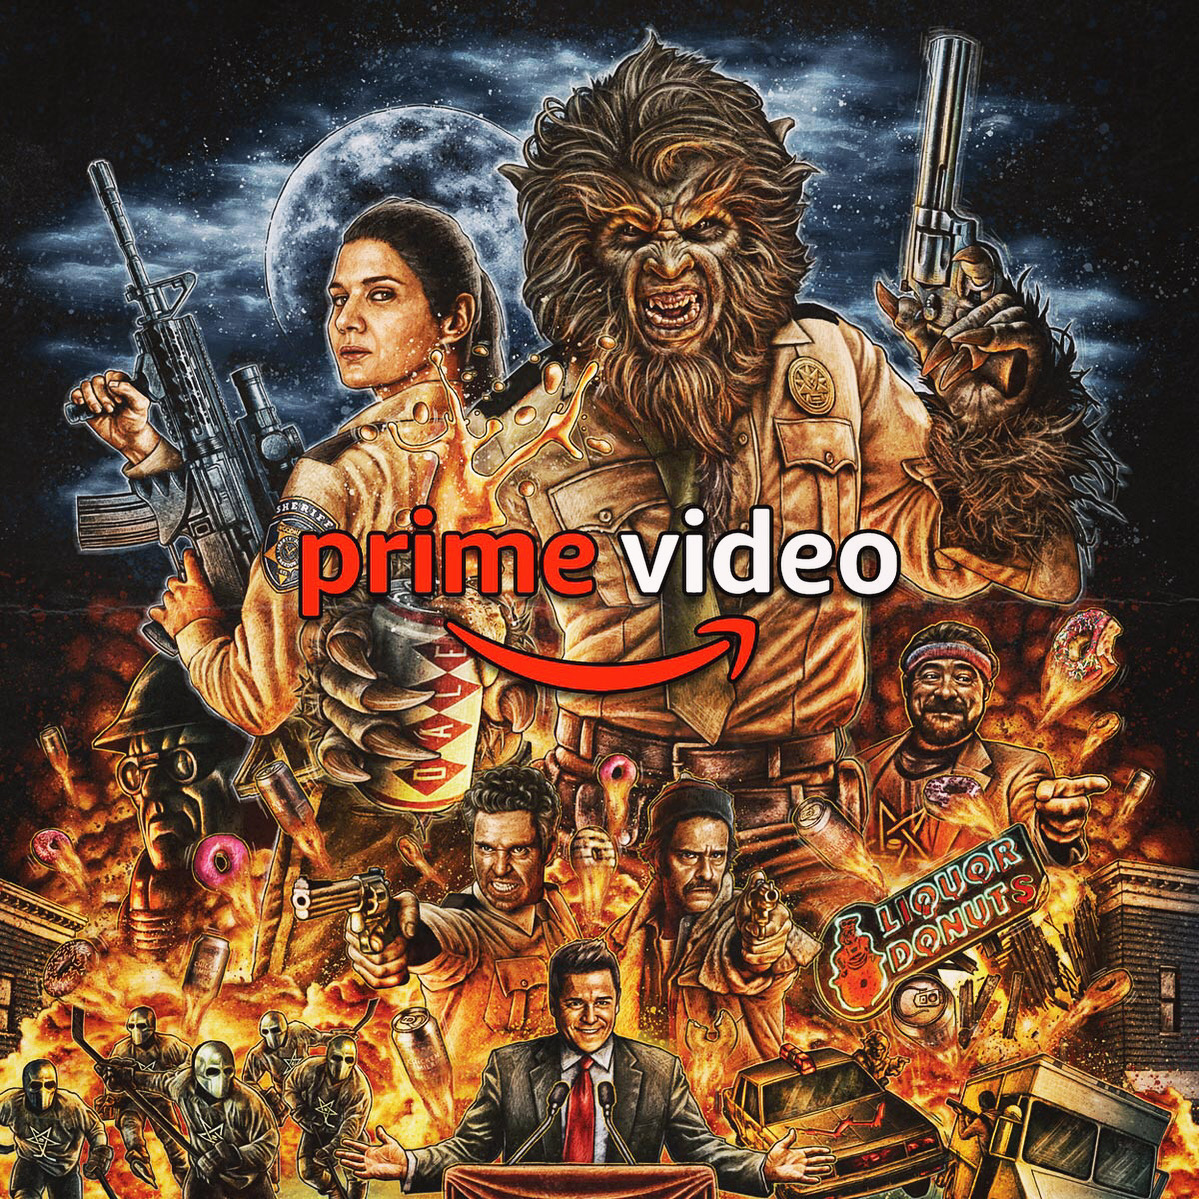 Looking for something bizarre to watch? Another WolfCop (and the prequel) are now streaming on Amazon Prime! 🇨🇦 #WOLFCOP #Horror #HorrorMovies #Comedy #AmazonPrime  #CanadianFilm #Saskatchewan #Werewolf